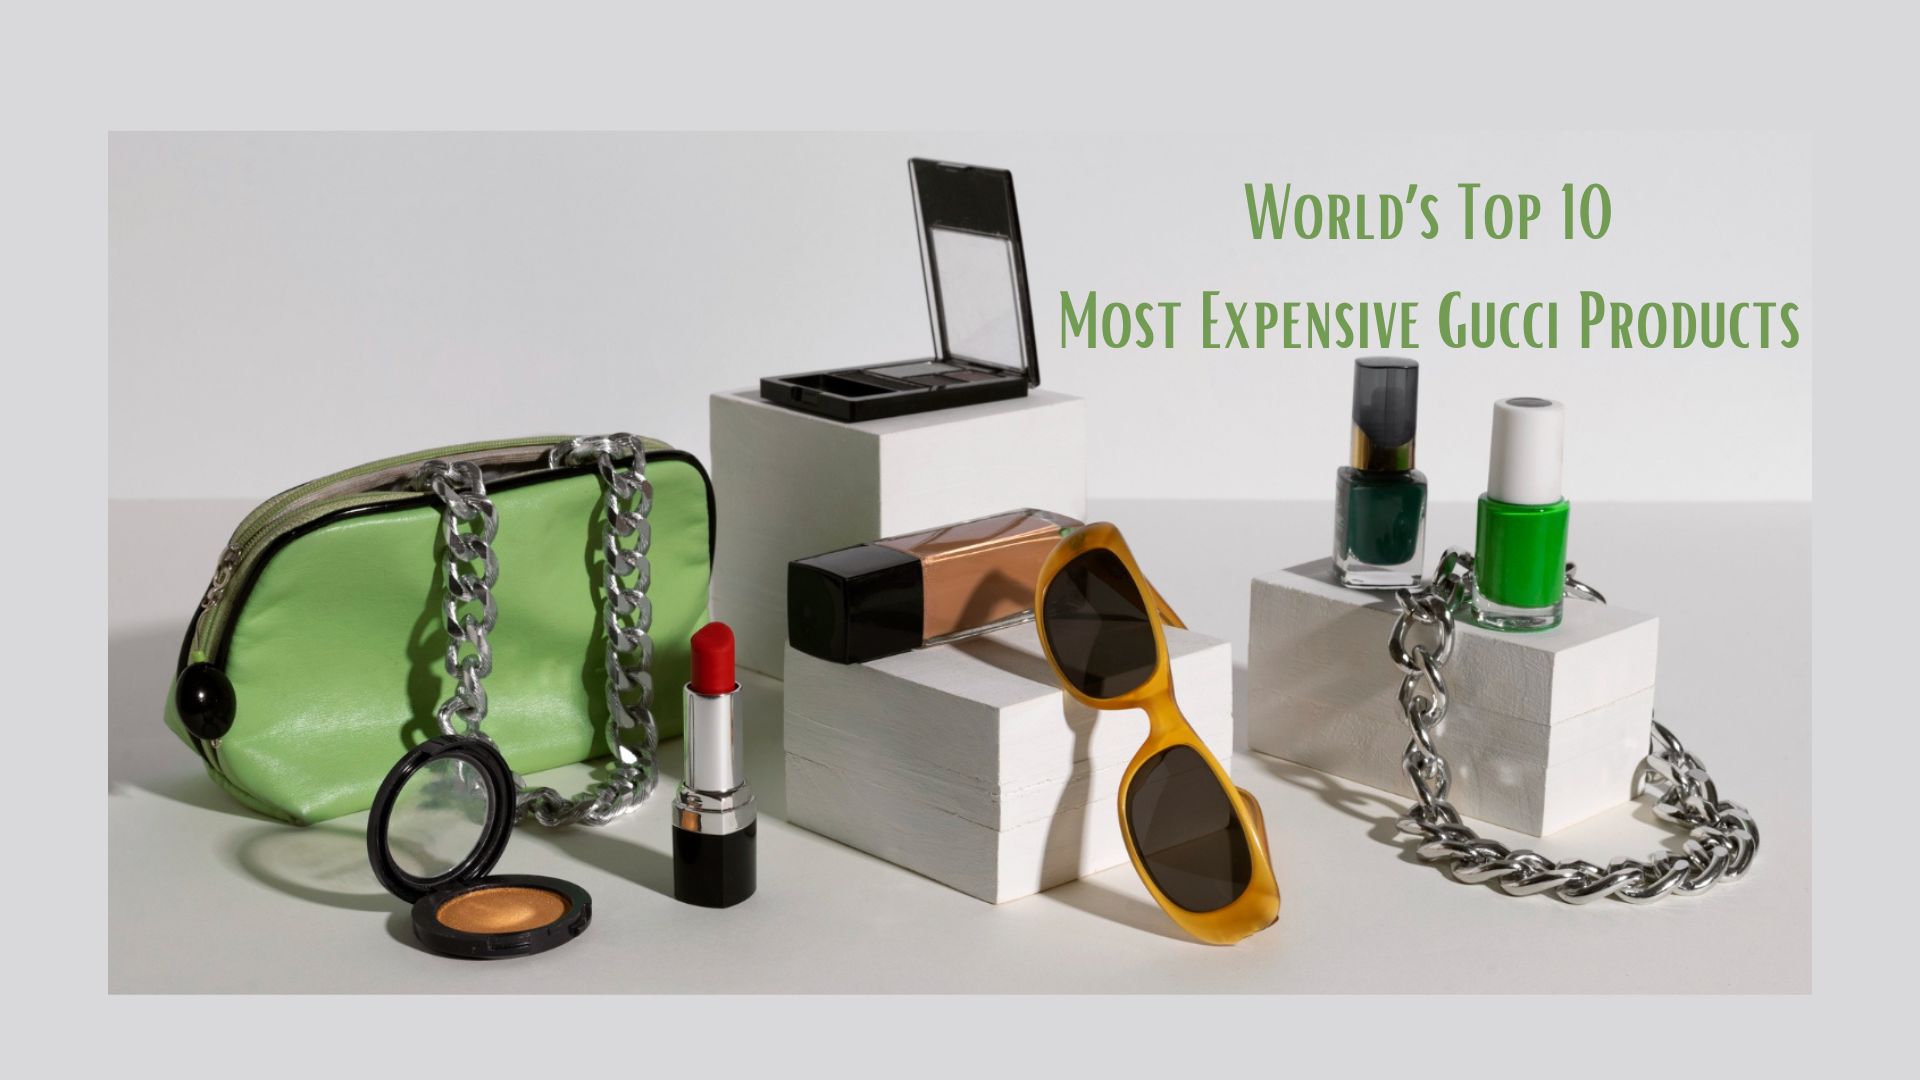 Globally Glamorous: Top 10 Most Expensive Gucci Products in the World